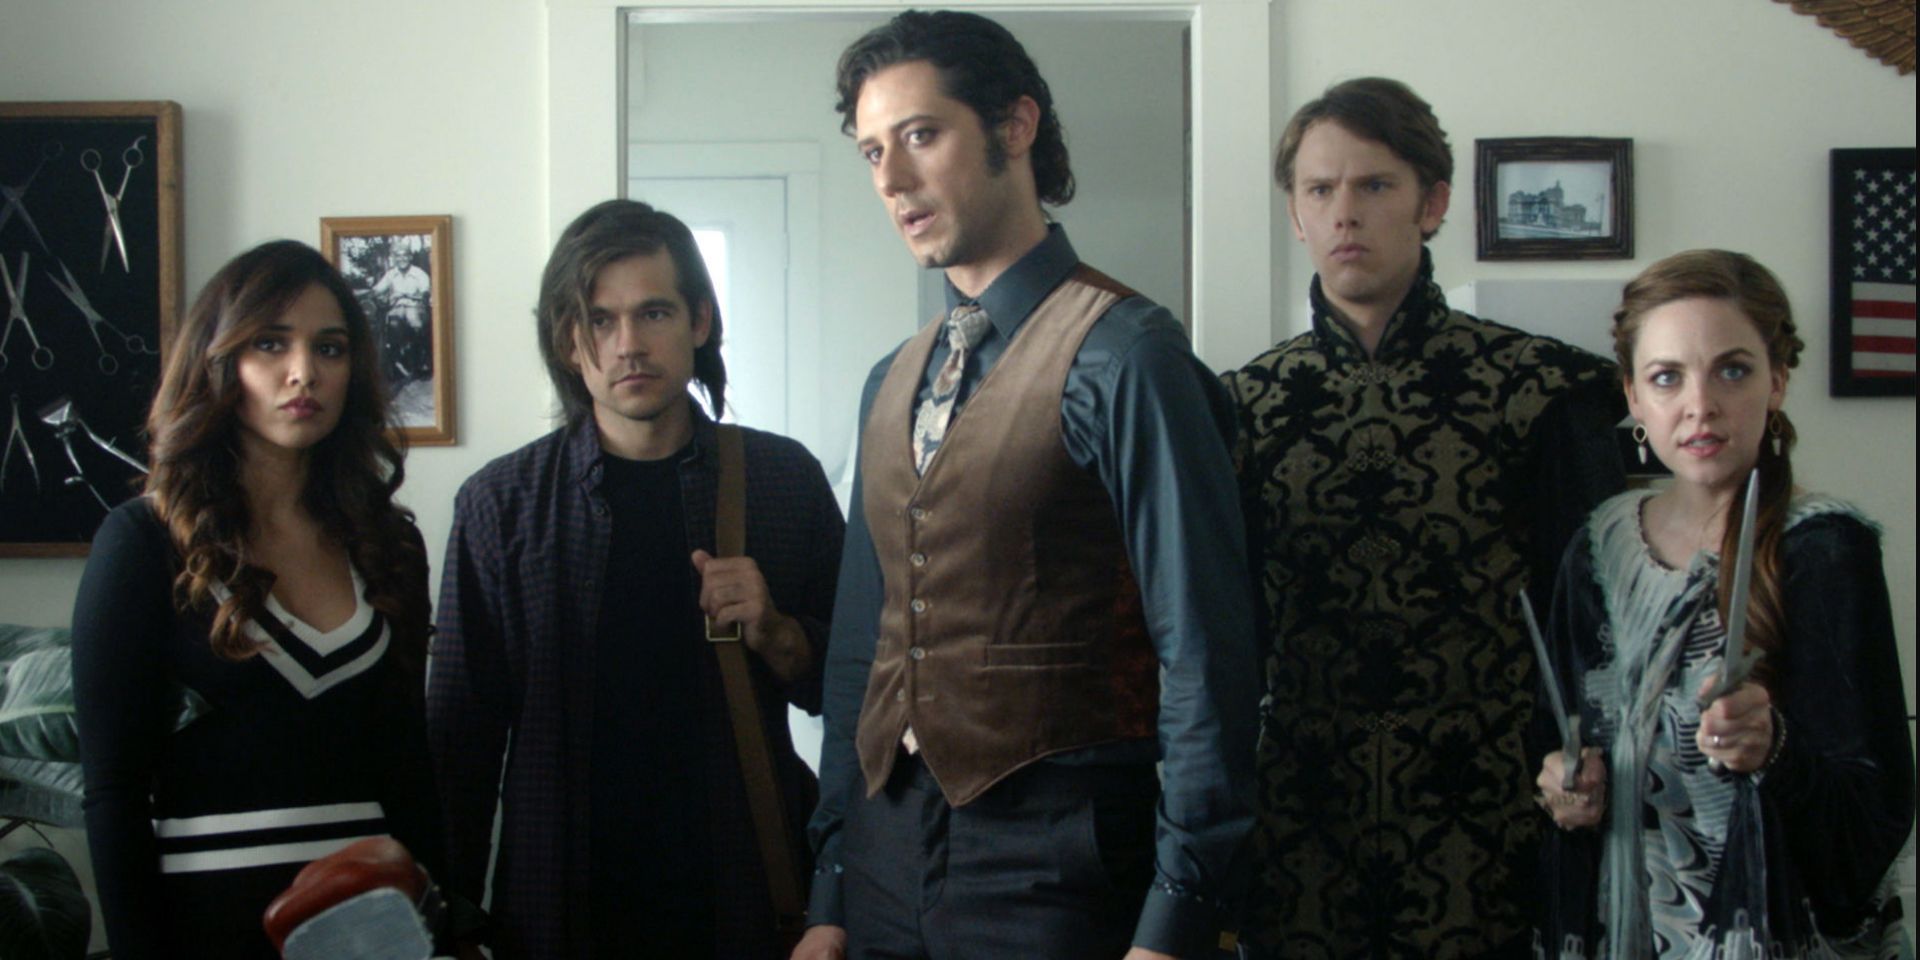 10 Best Episodes Of The Magicians According To IMDb